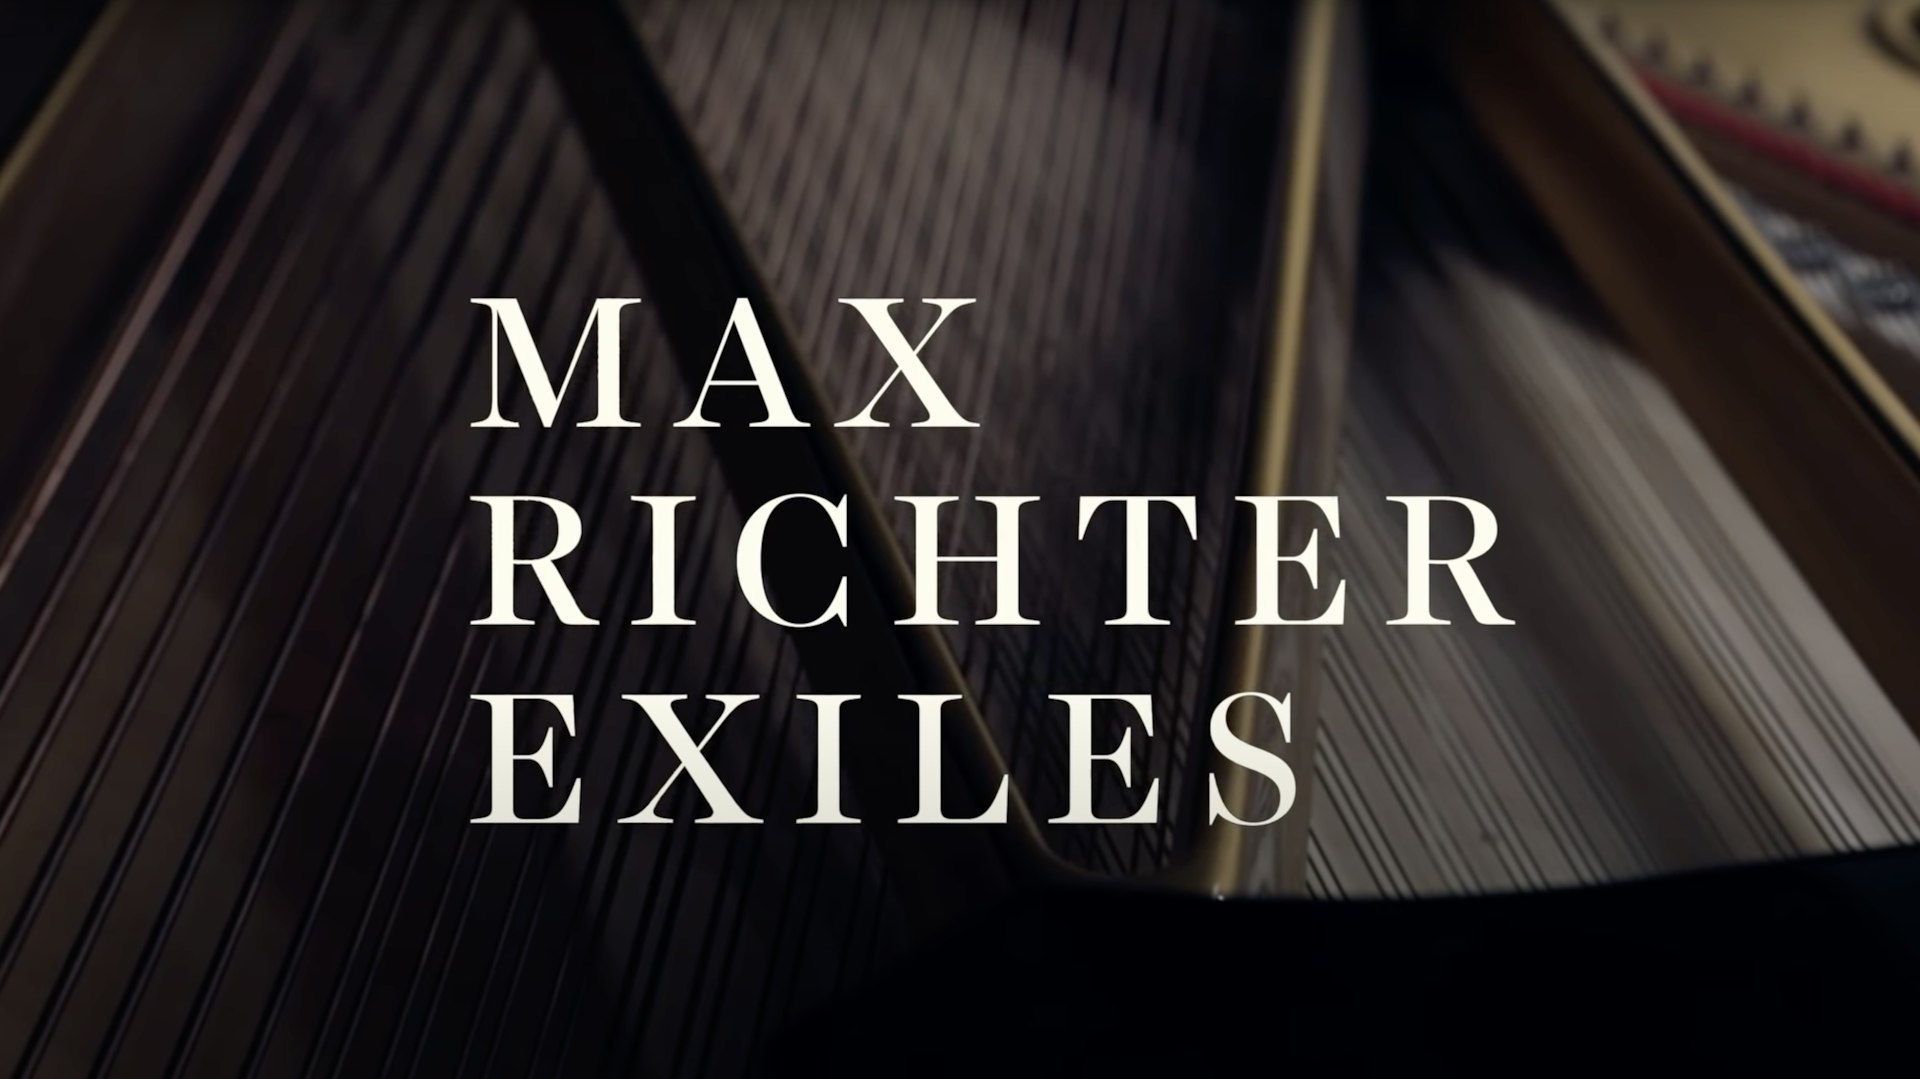 Exclusive: Max Richter interview - inspiration, AI, cinema and